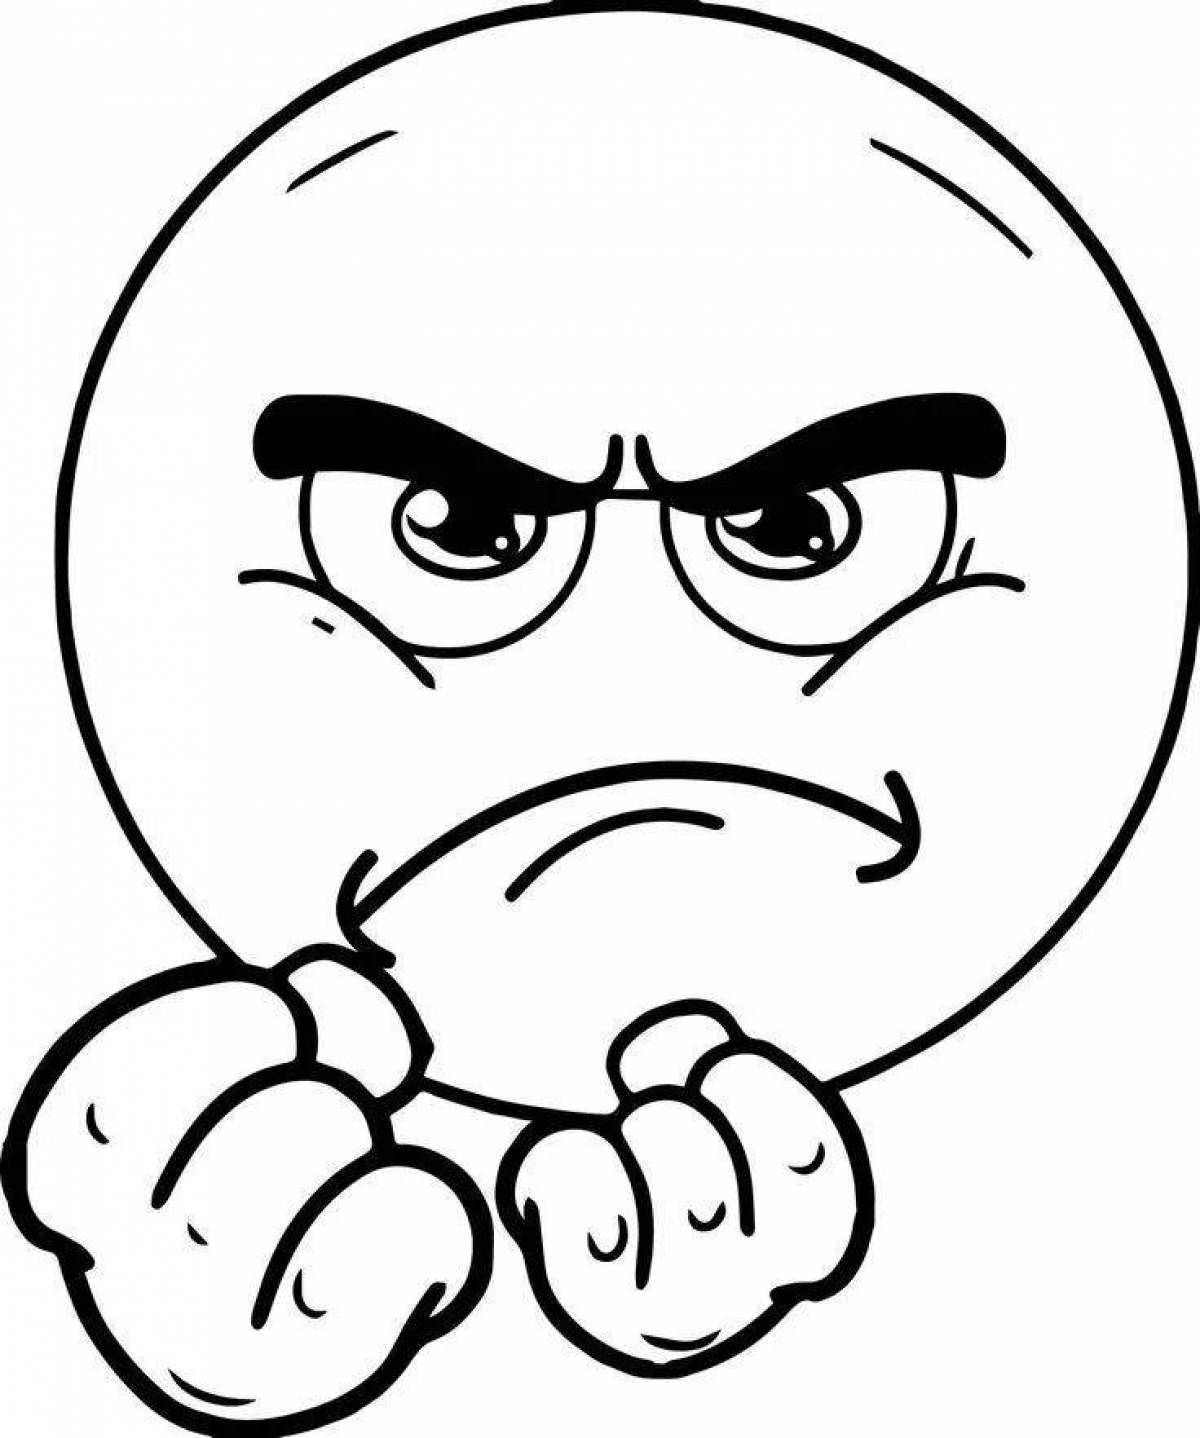 Testy coloring page angry emoticon